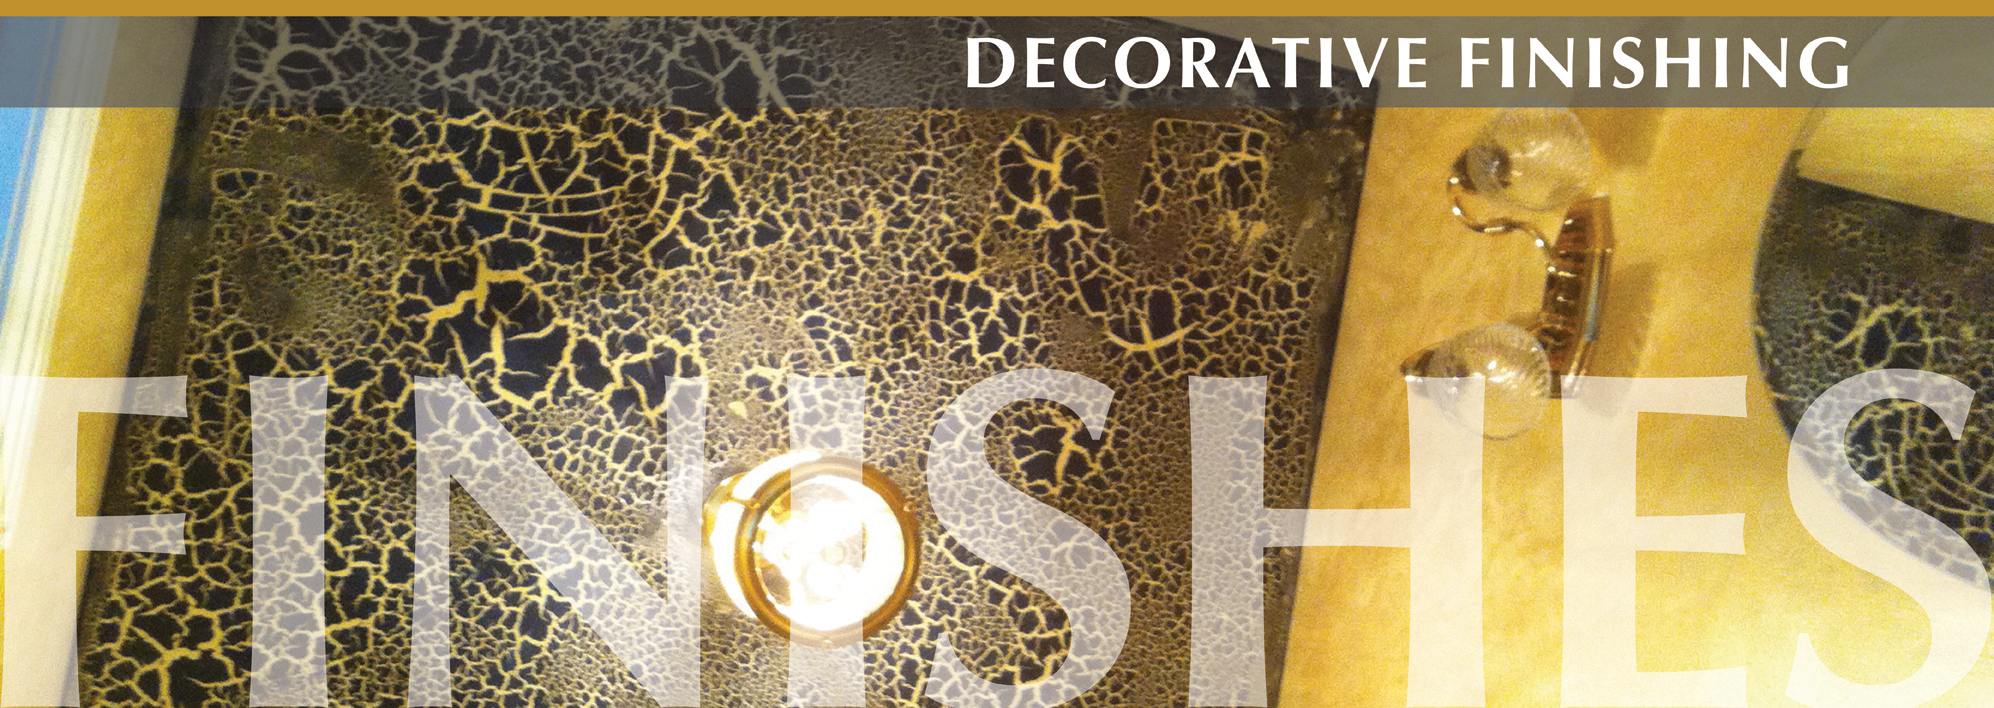 DECORATIVE FINISHES: A FULL SPECTRUM OF STYLES &amp; MATERIALS